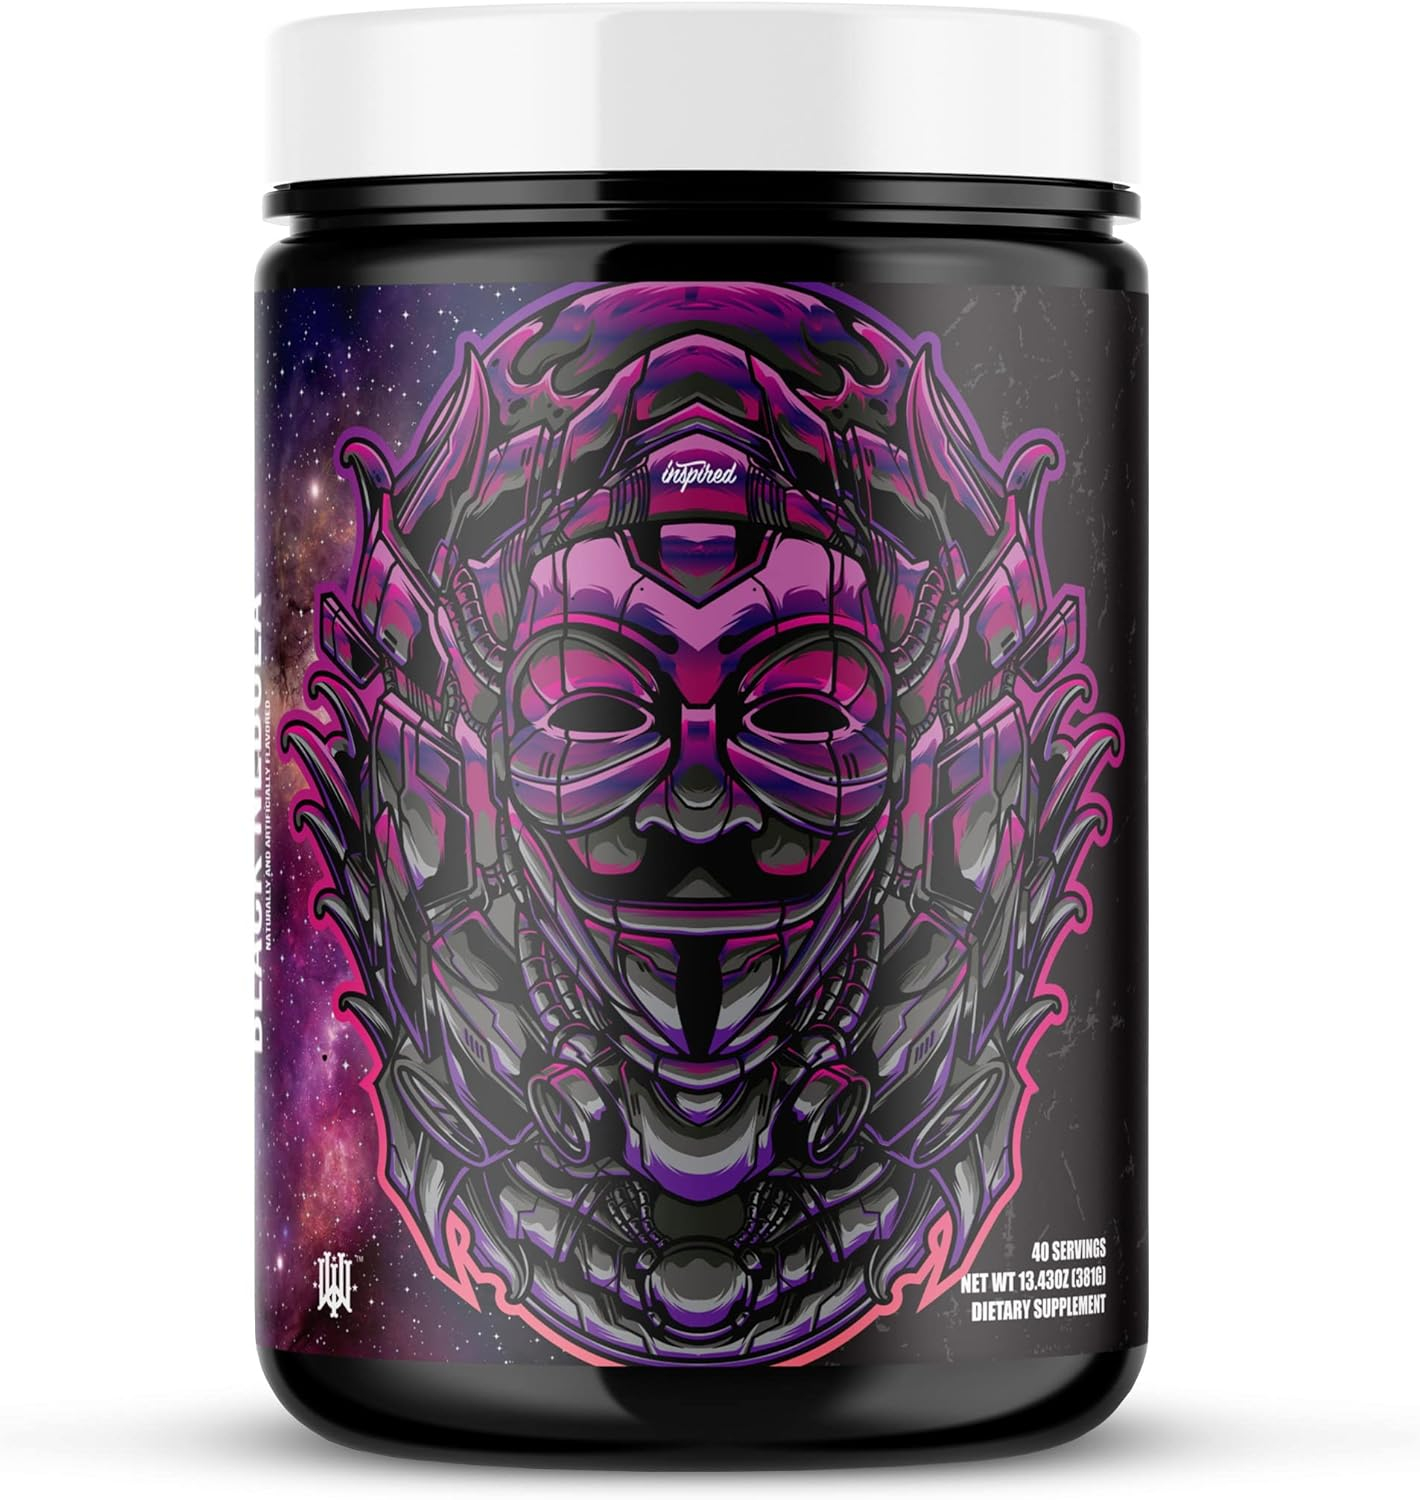 Inspired Nutraceuticals - DVST8 of The Union Pre-Workout Powder, No Artificial Colors - Black Nebula, 40 Servings